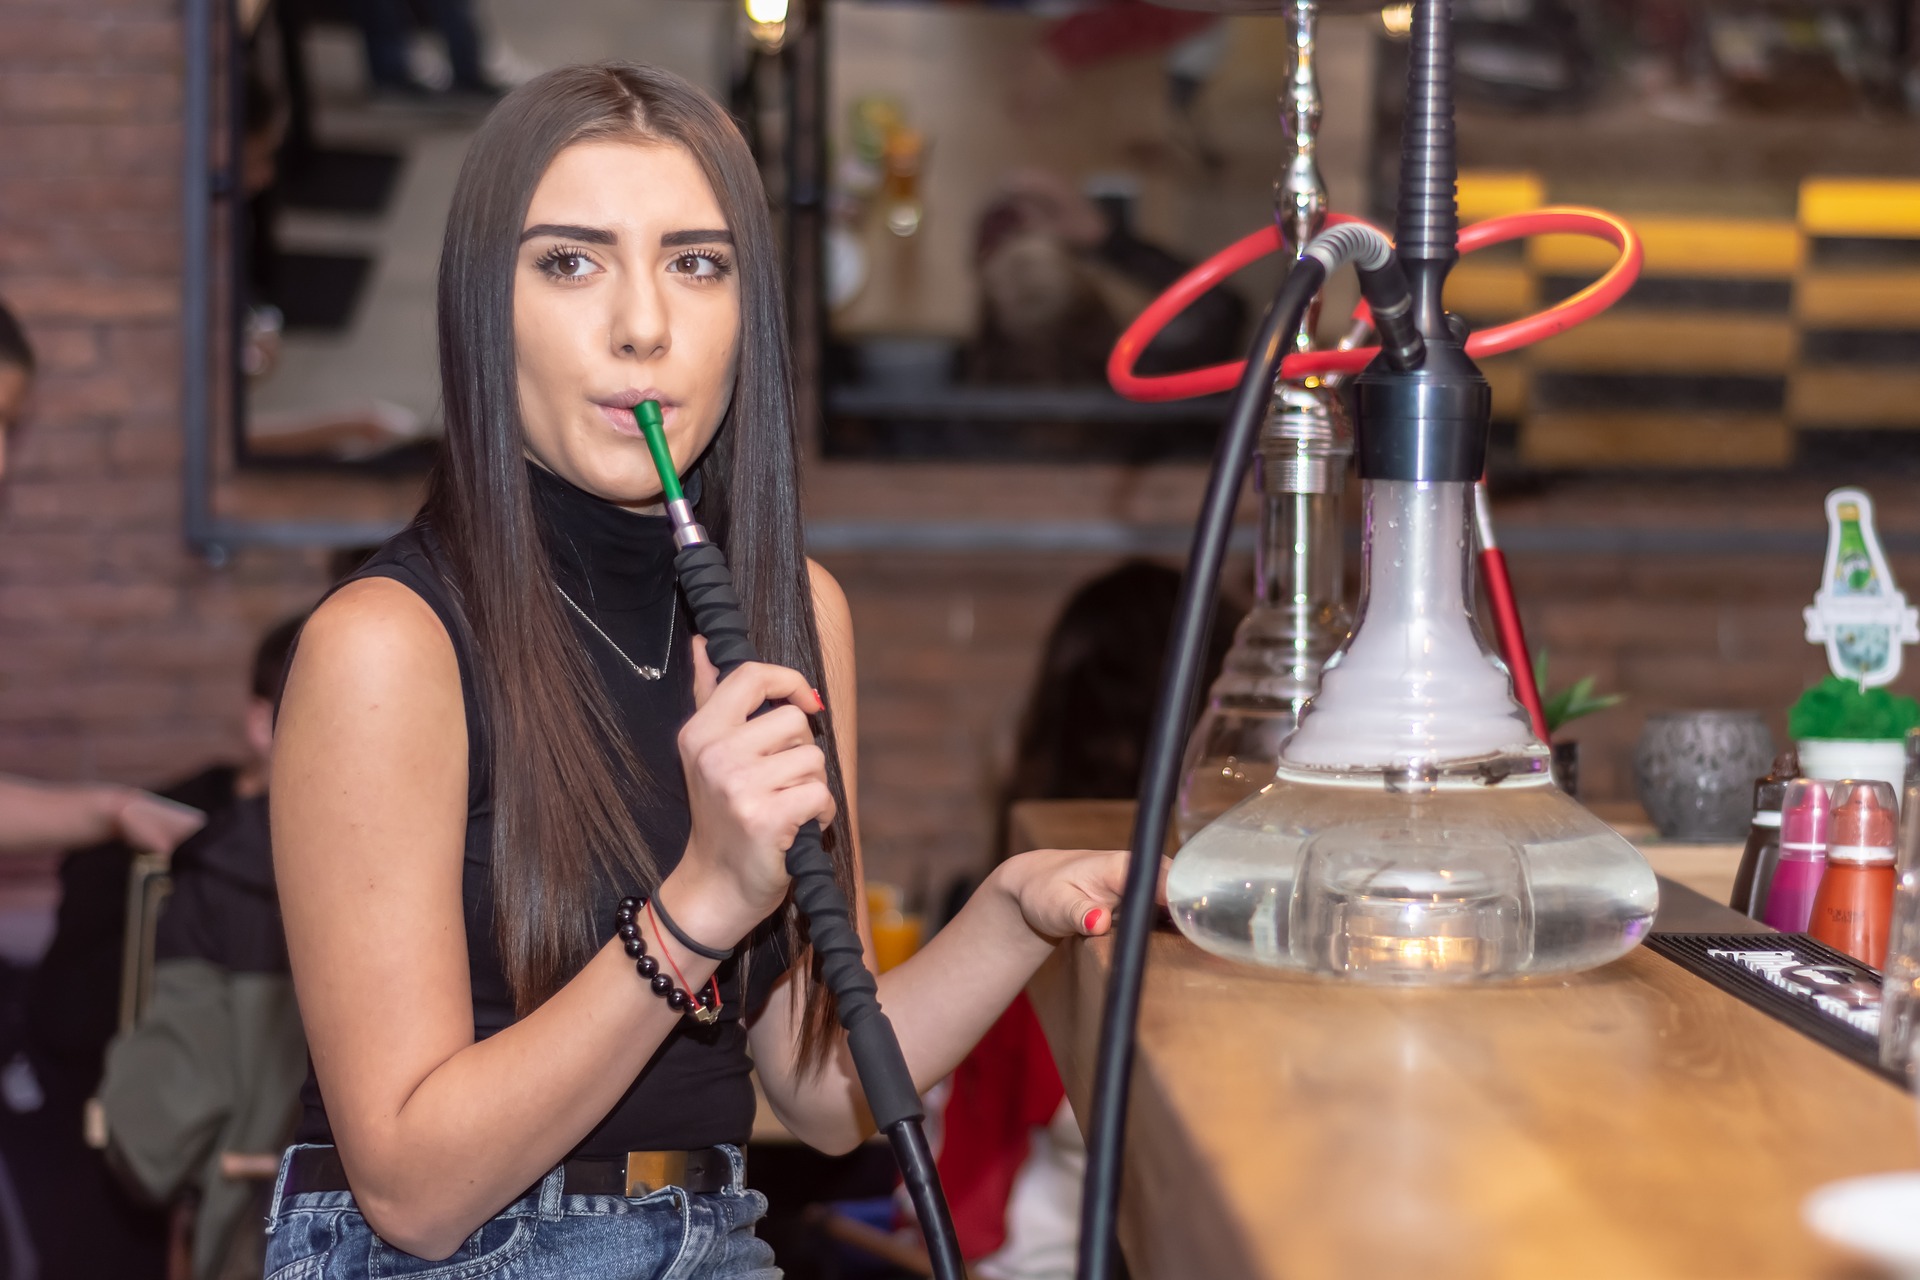 A young woman smoking from a hookah pipe